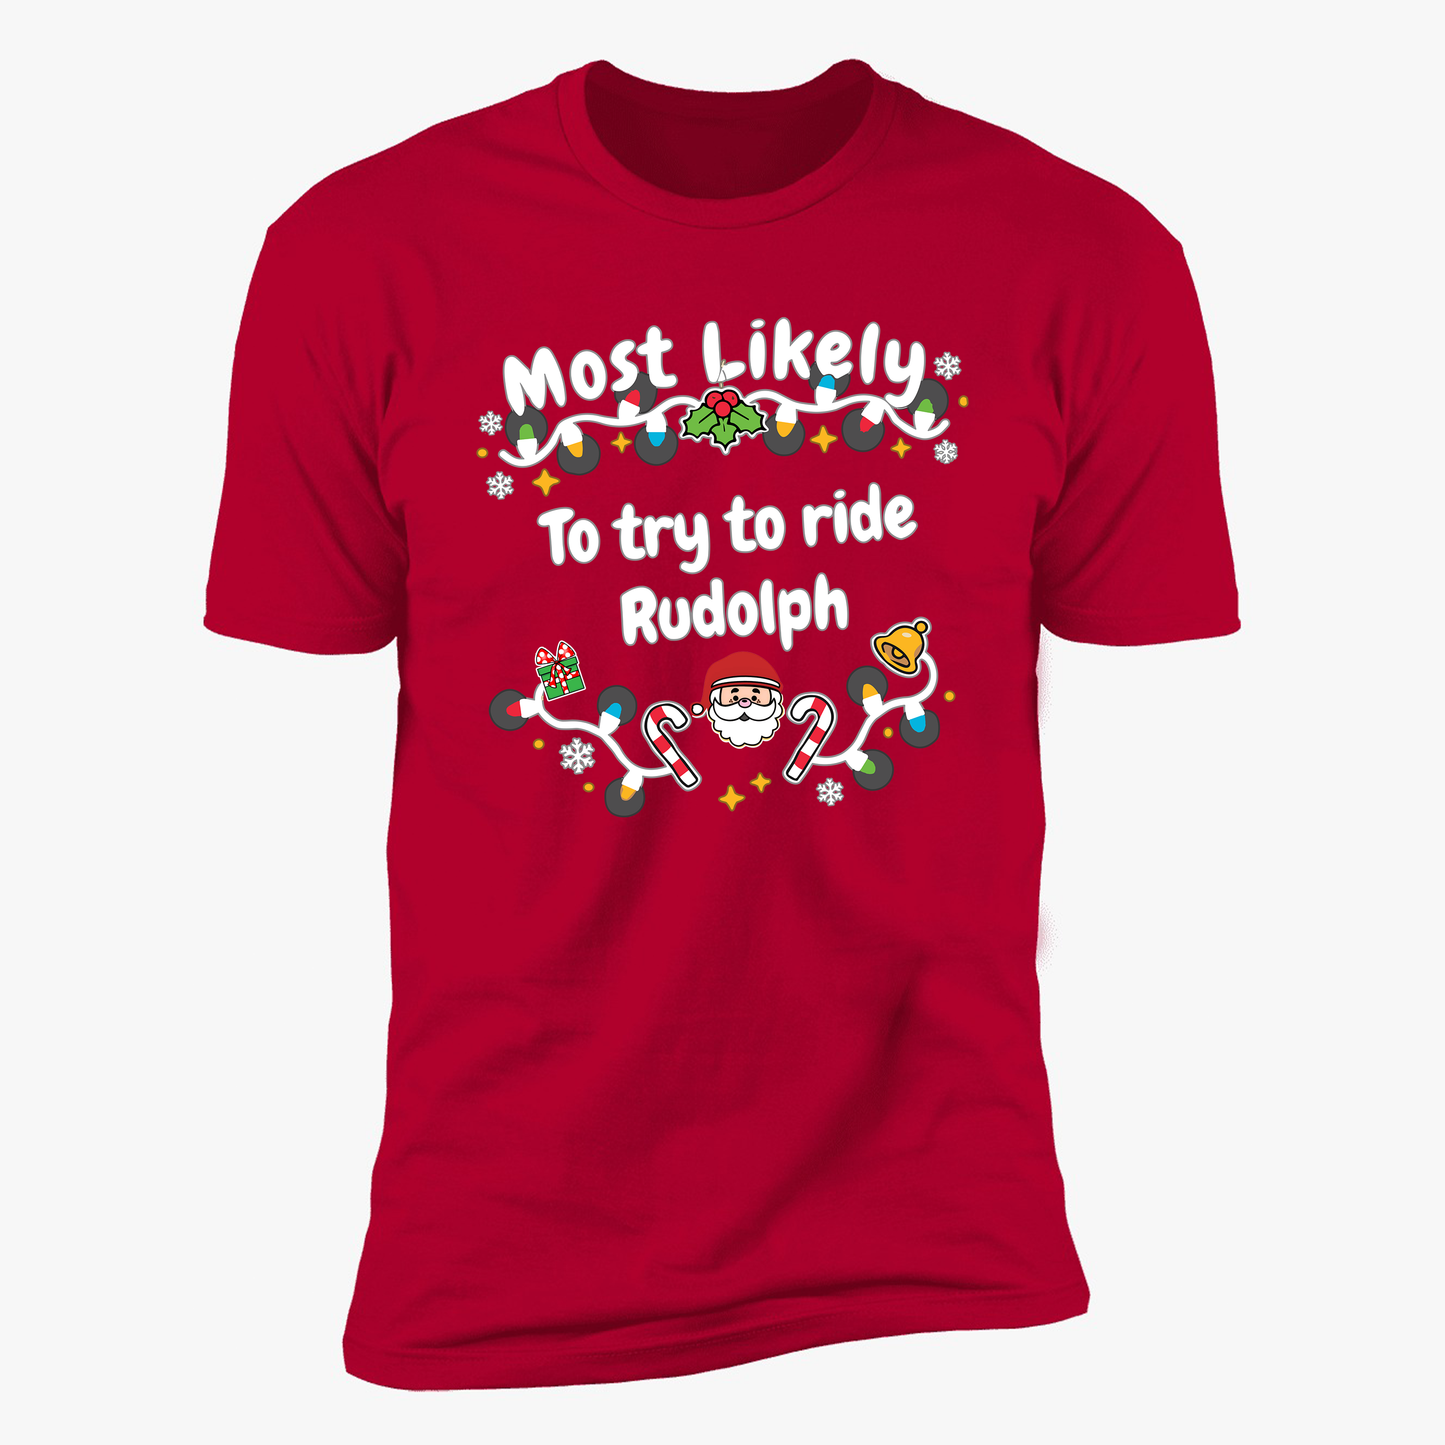 *Most Likely To try To Ride Rudolph & Rudolph Red Deluxe Unisex Tees*